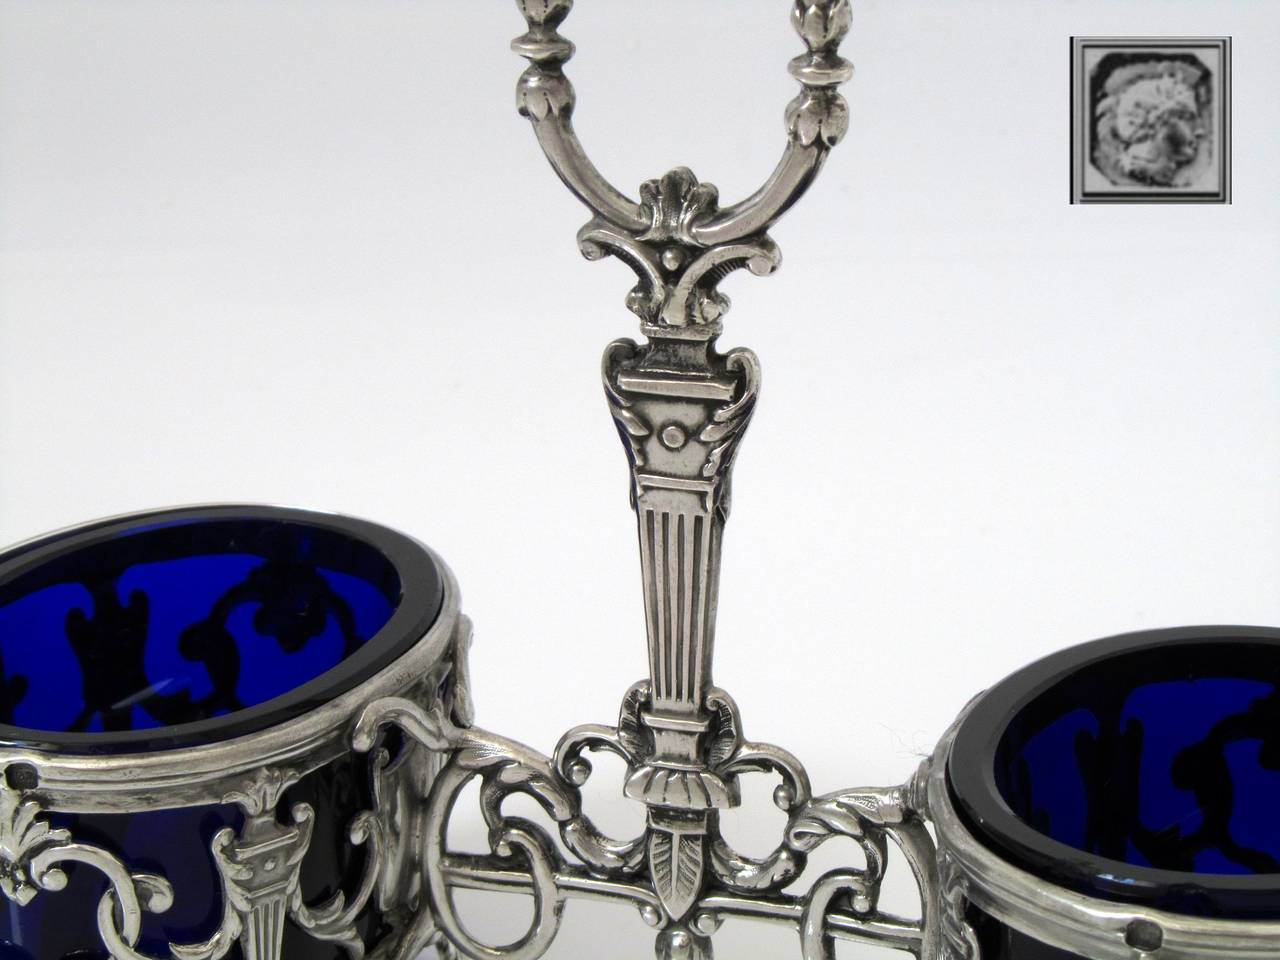 Antique French Sterling Silver & Cobalt Glass Open Salt Caddy Napoleon III 

Head of Minerve 1st titre on the caddy for 950/1000 French Sterling Silver guarantee.

Exceptional Antique French sterling silver Open Salt Caddy with original Cobalt